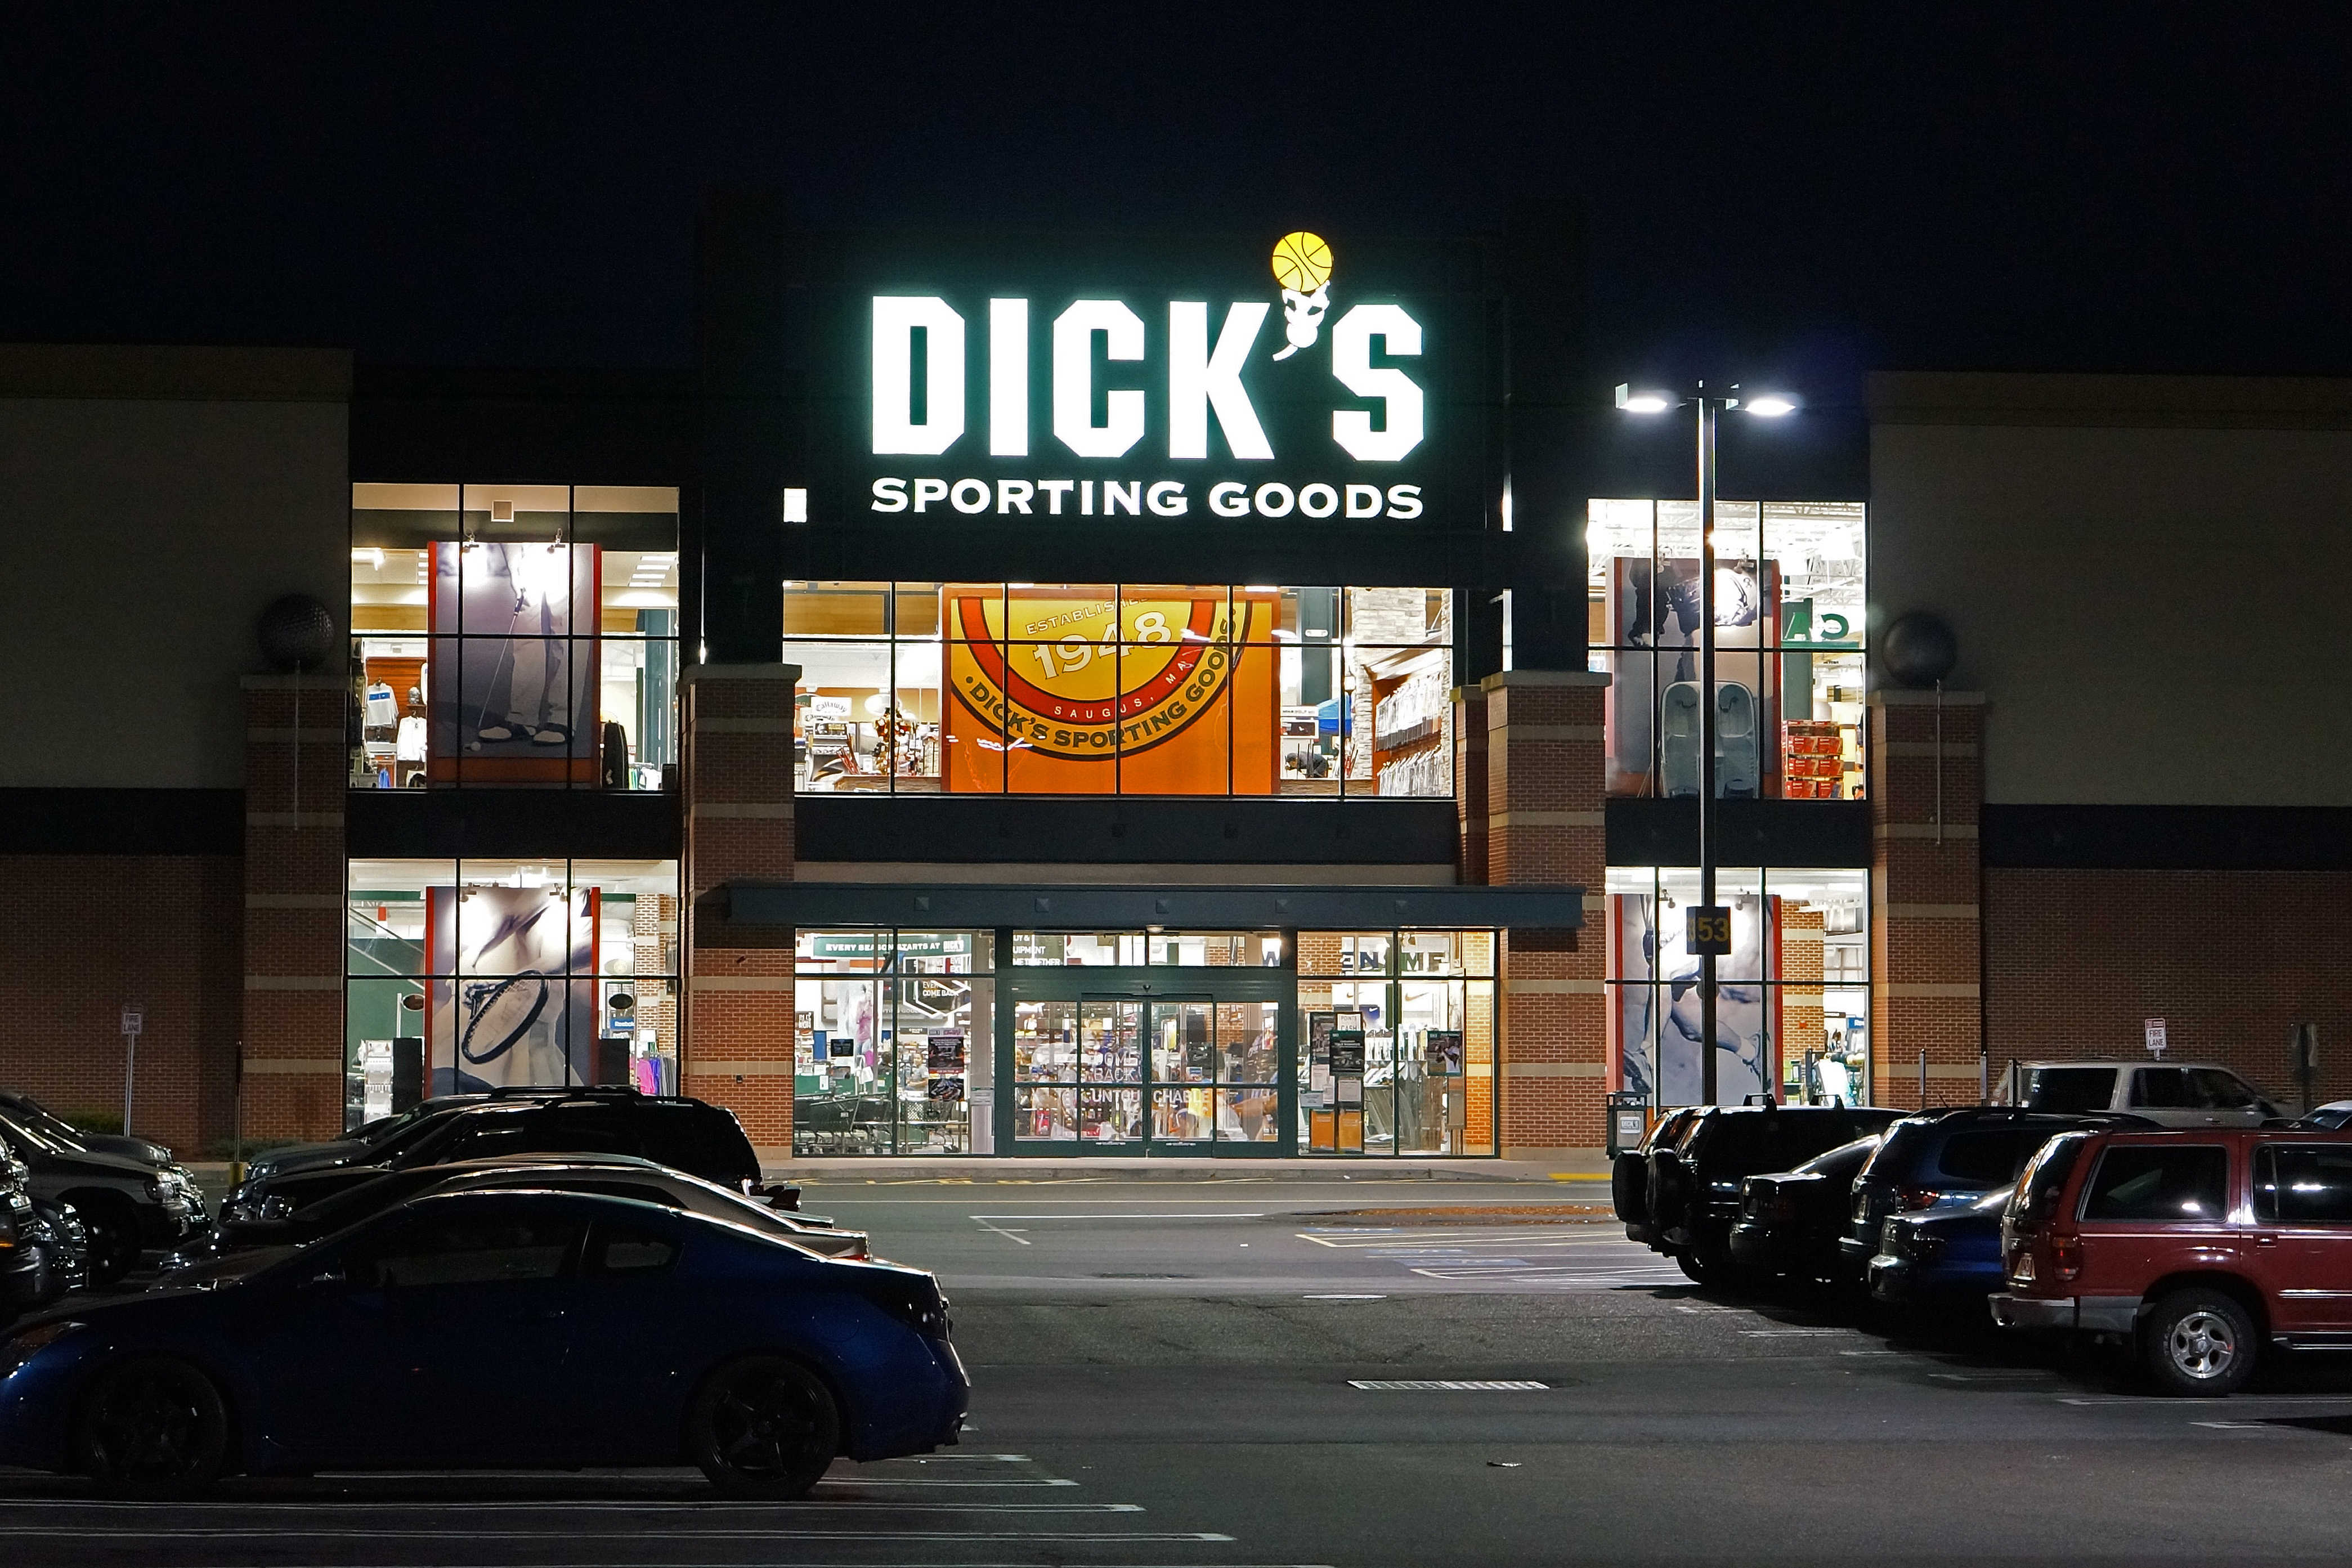 Dicks sporting goods first store